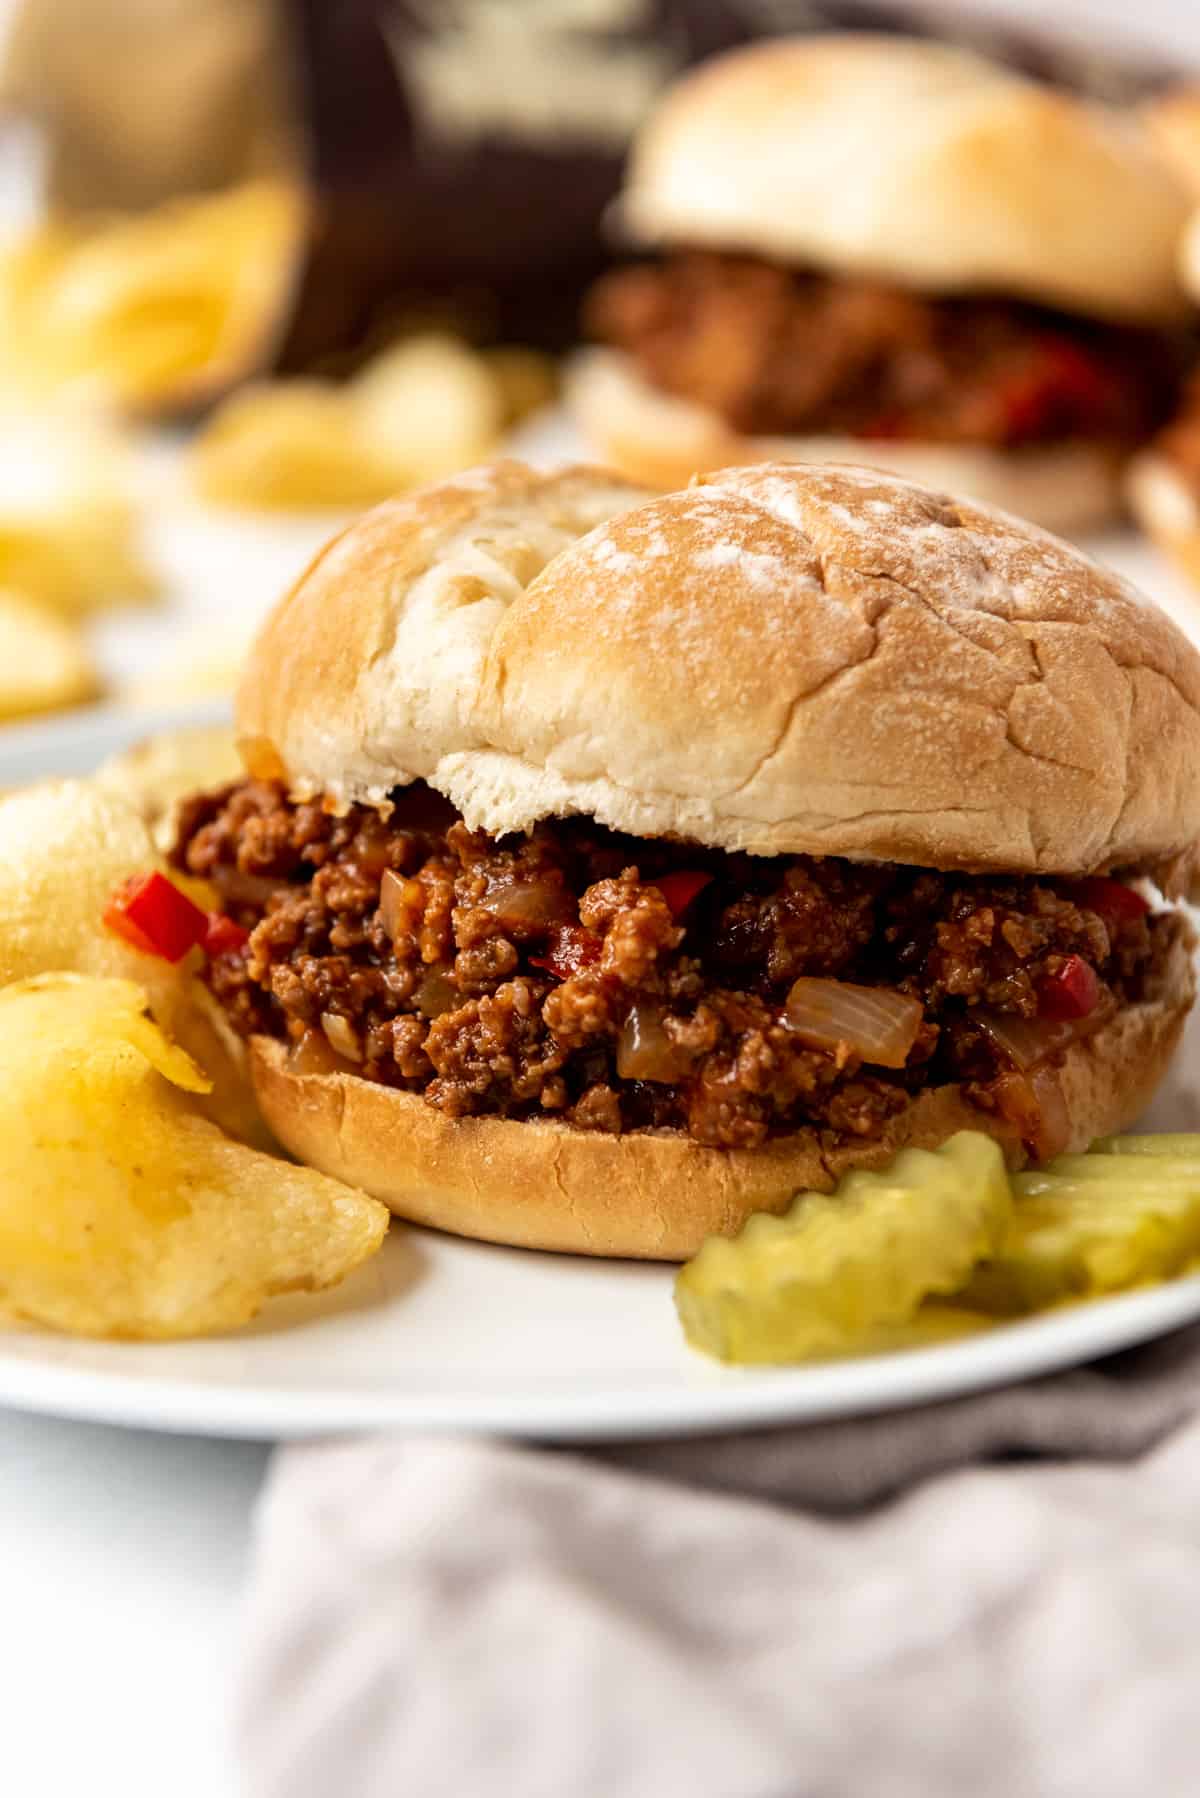 A homemade sloppy joe sandwich on a plate with pickles and potato chips.